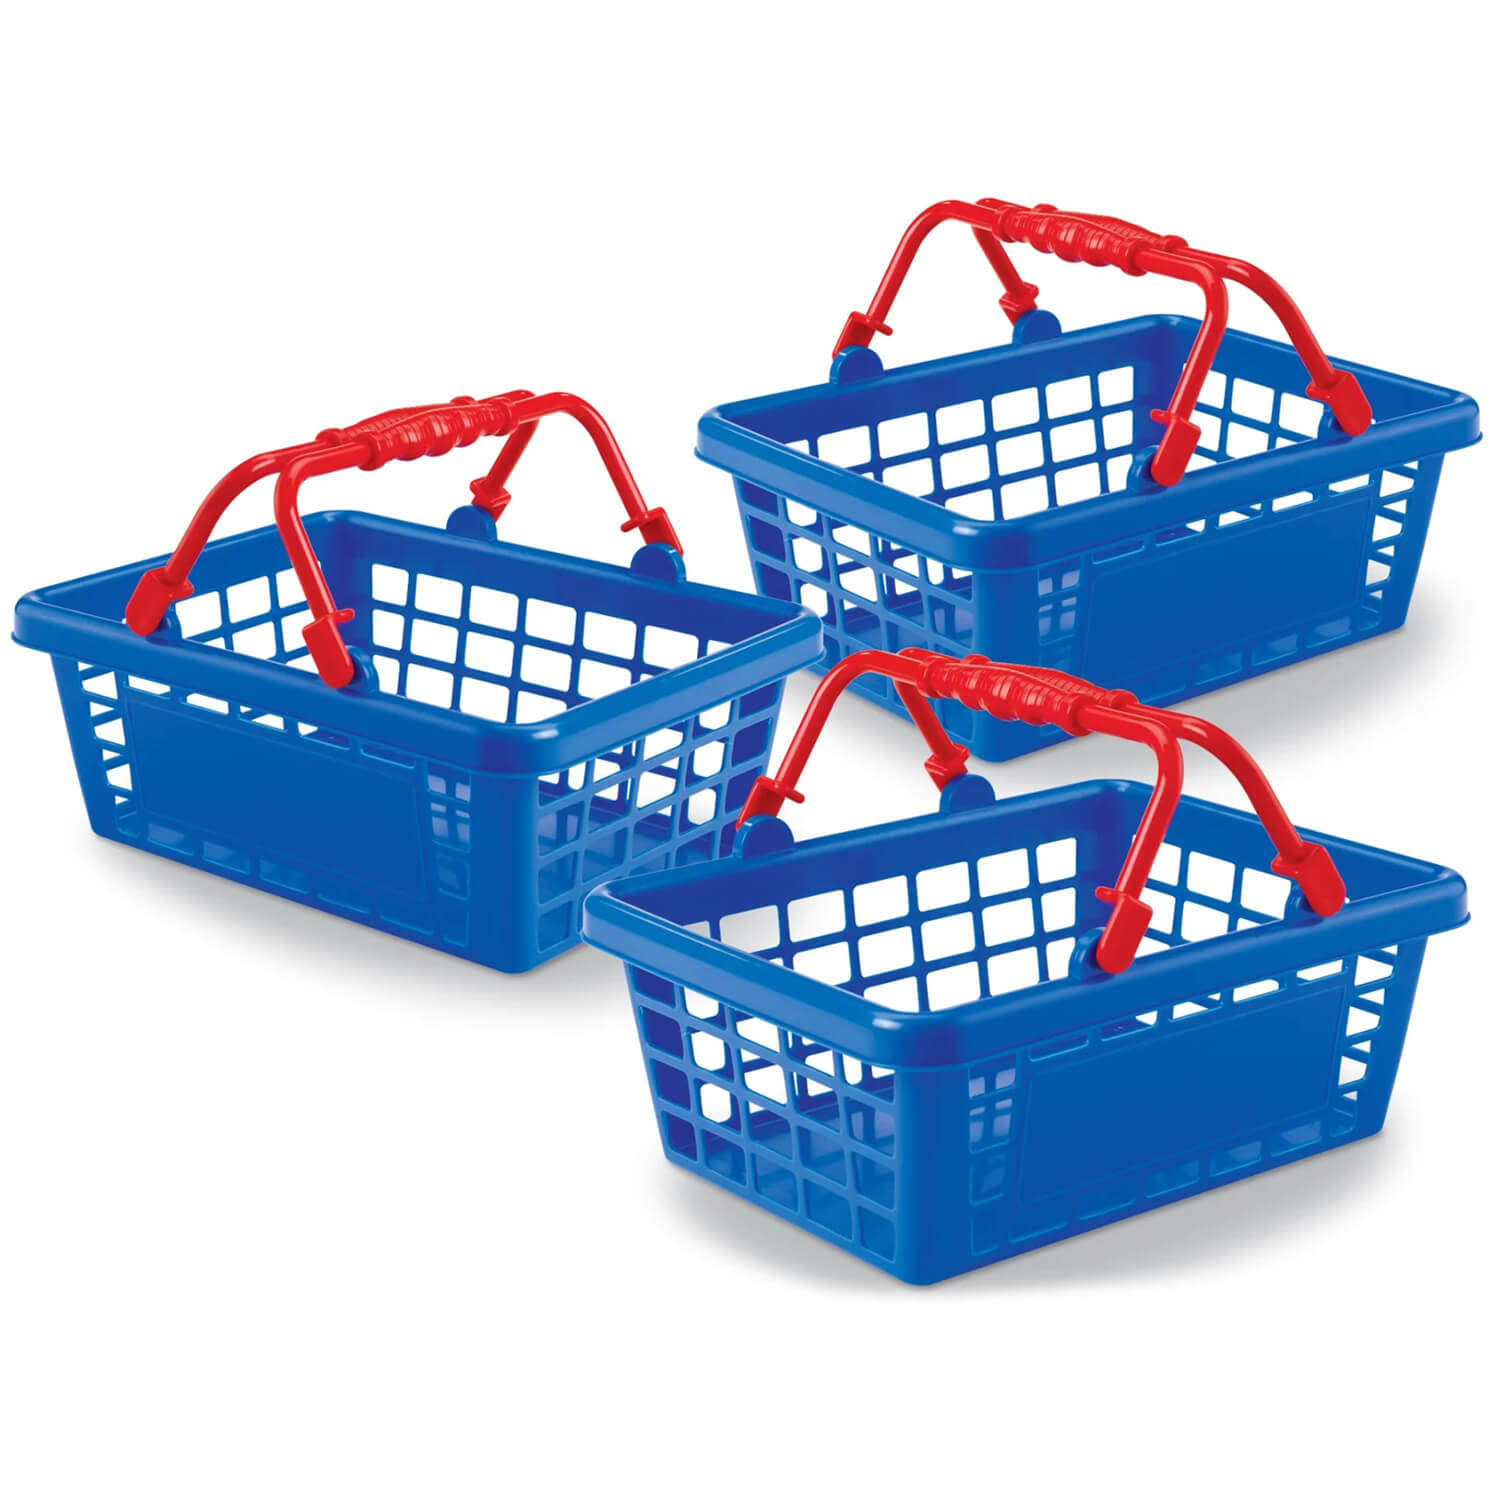 W17959919 Let’s Go Shopping Grocery Baskets